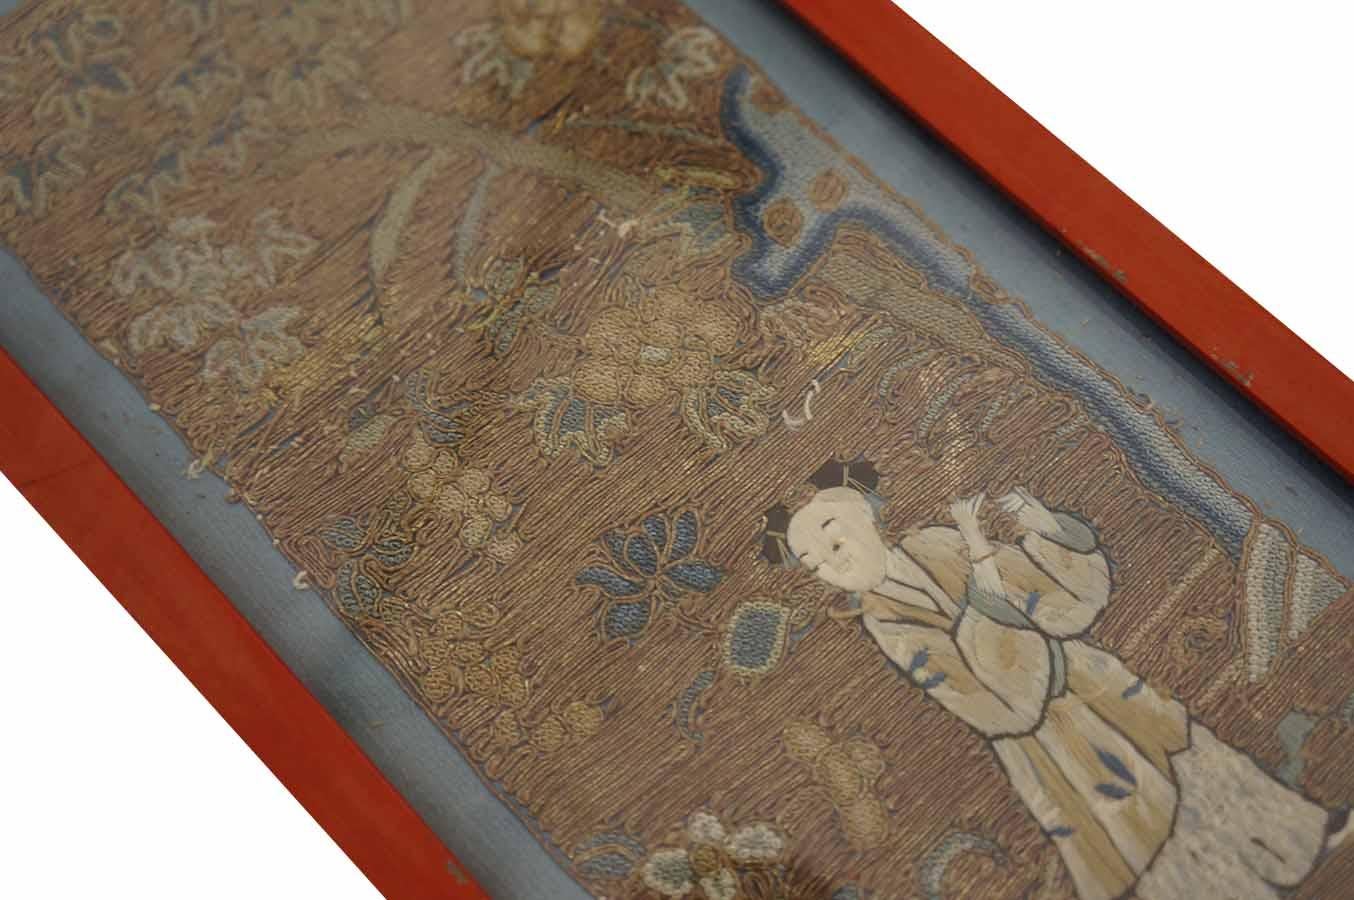 Metal Antique Chinese Textile 0' 5'' x 0' 22'' For Sale